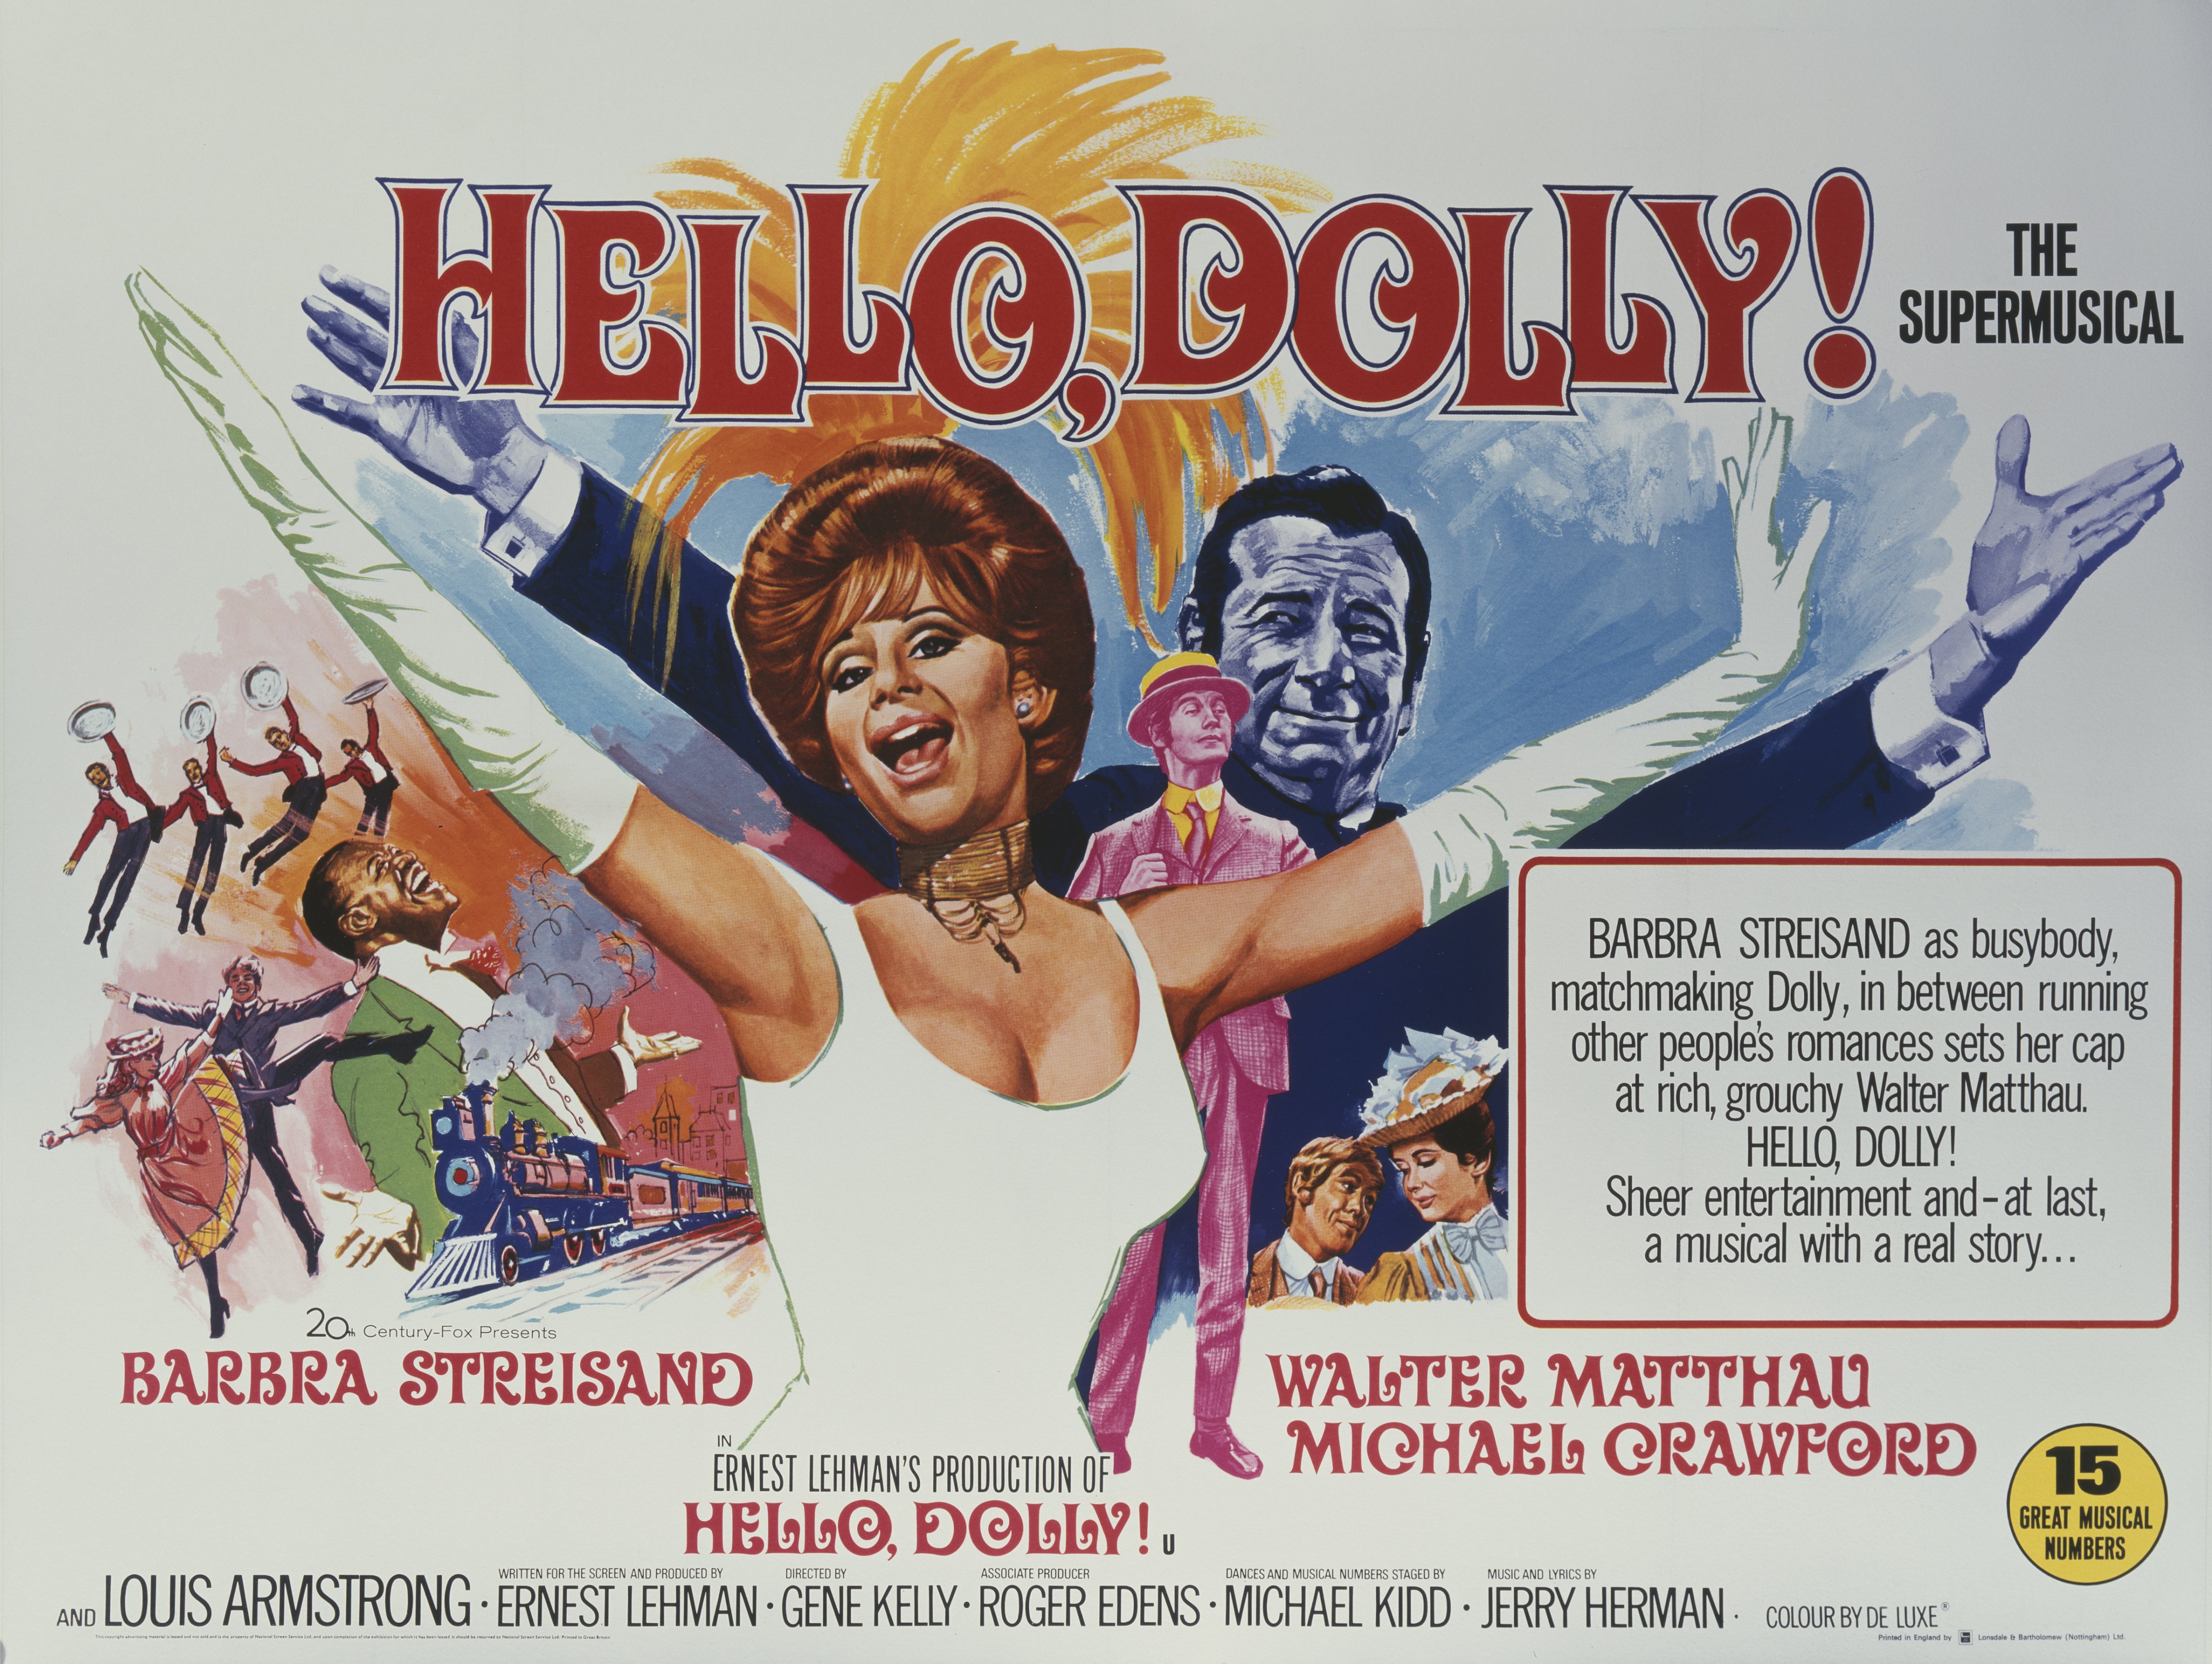 A British poster for Gene Kelly's 1969 romantic comedy musical film, 'Hello Dolly!', starring (left to right) Barbra Streisand,  Michael Crawford and Walter Matthau. (Movie Poster Image Art—Getty Images)